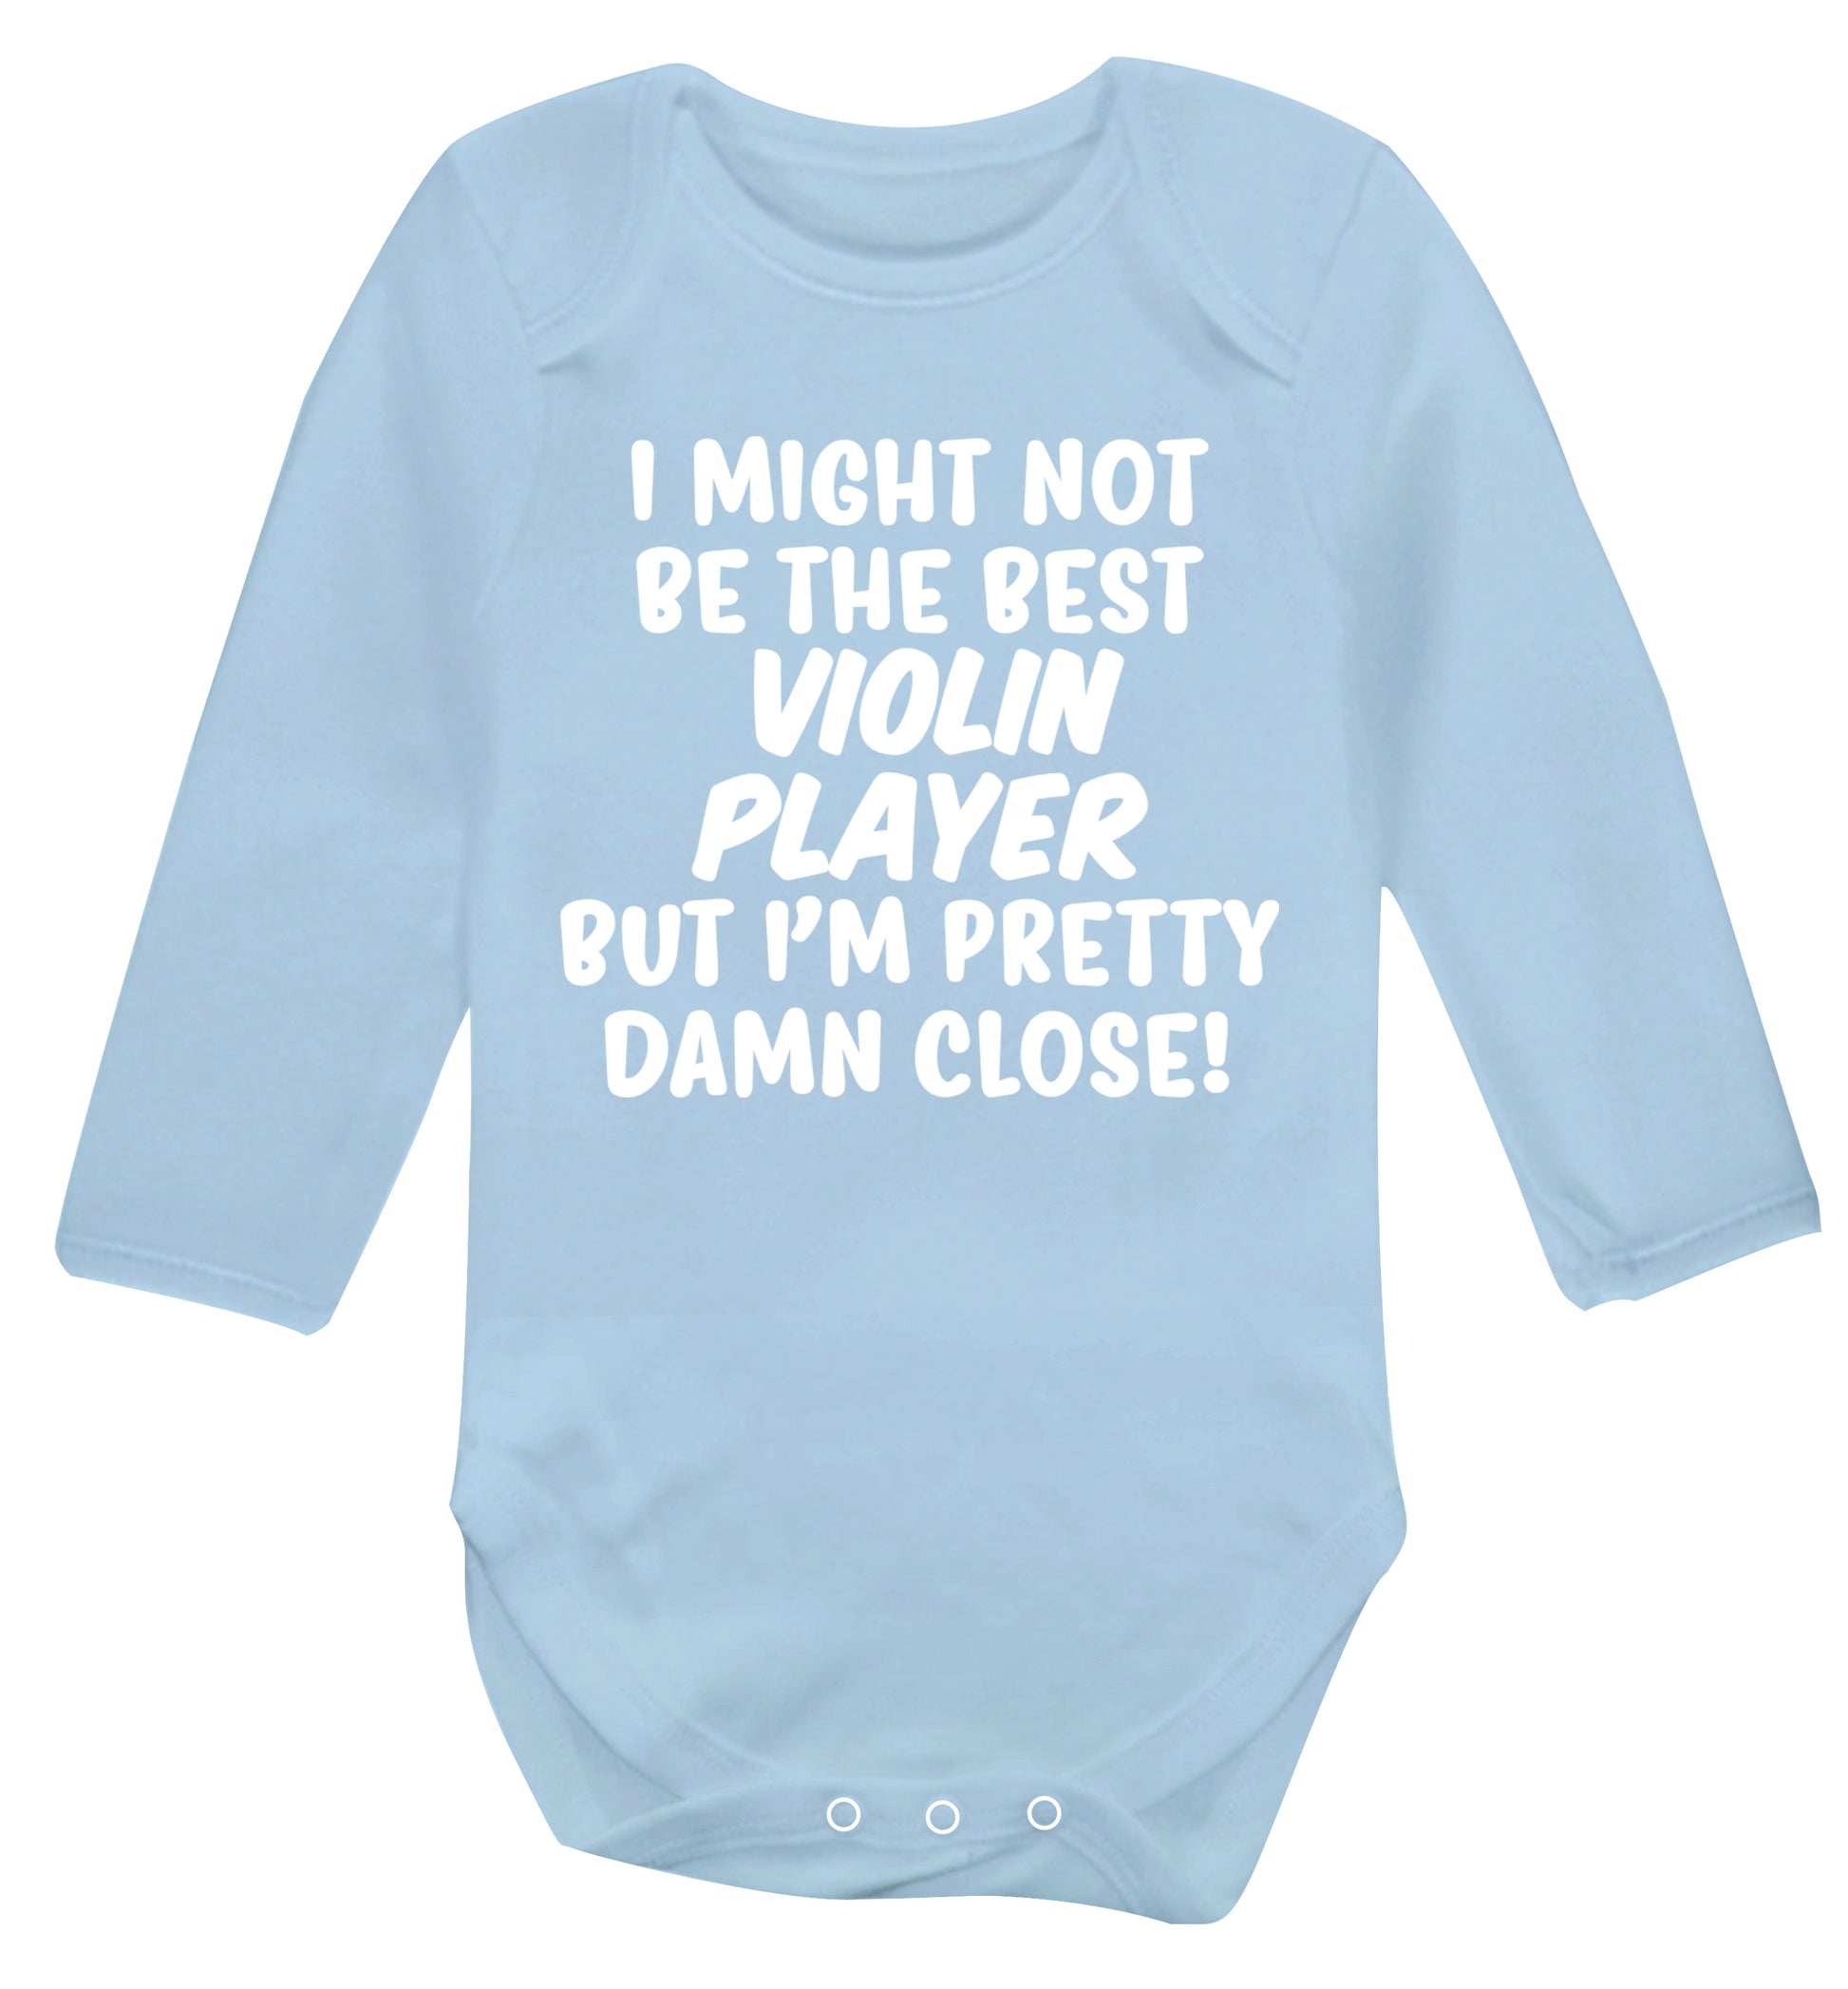 I might not be the best violin player but I'm pretty close Baby Vest long sleeved pale blue 6-12 months